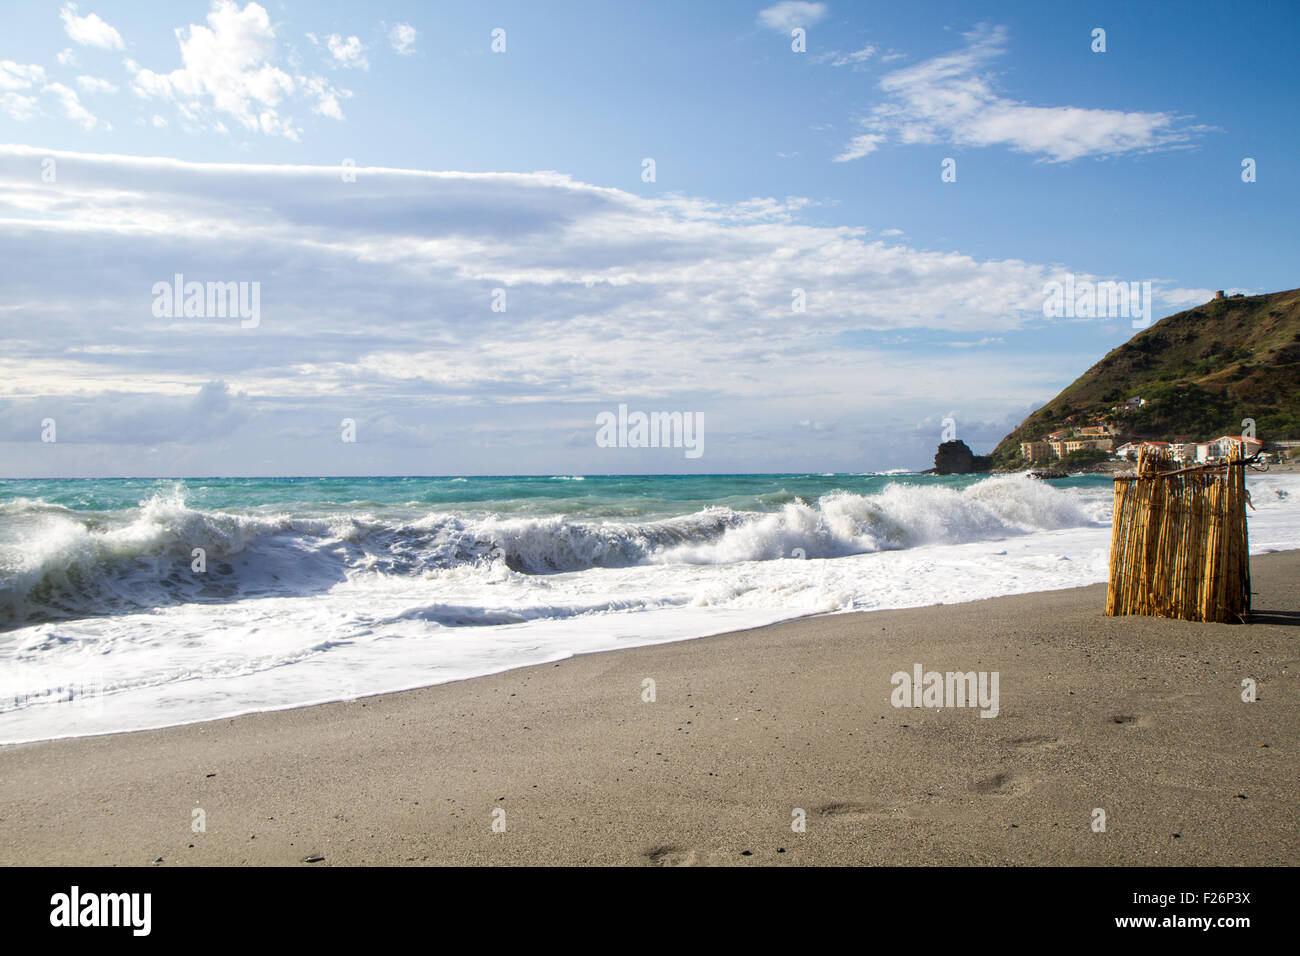 the waves breaking on the deserted beach, the background blue sky and clouds Stock Photo